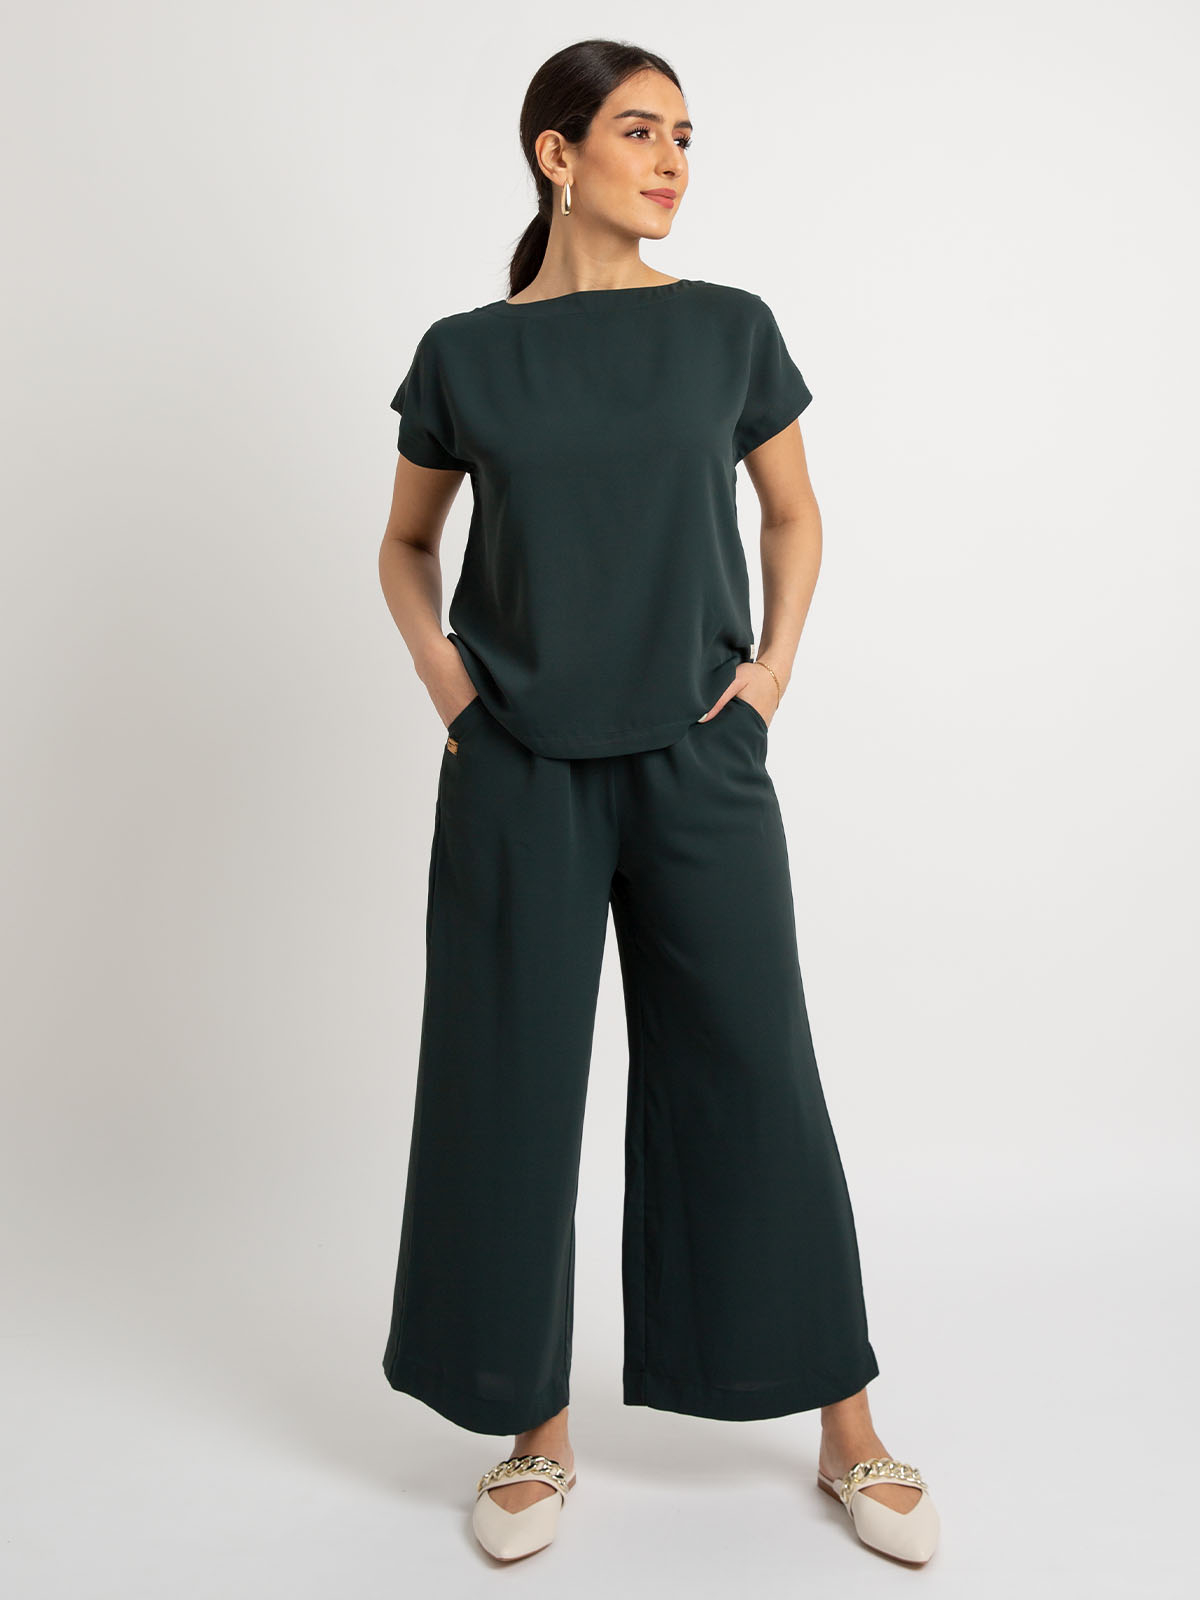 Kaafmeem women clothing dark green trouser and top under the abaya matching set in soft fabric coords for everyday wear